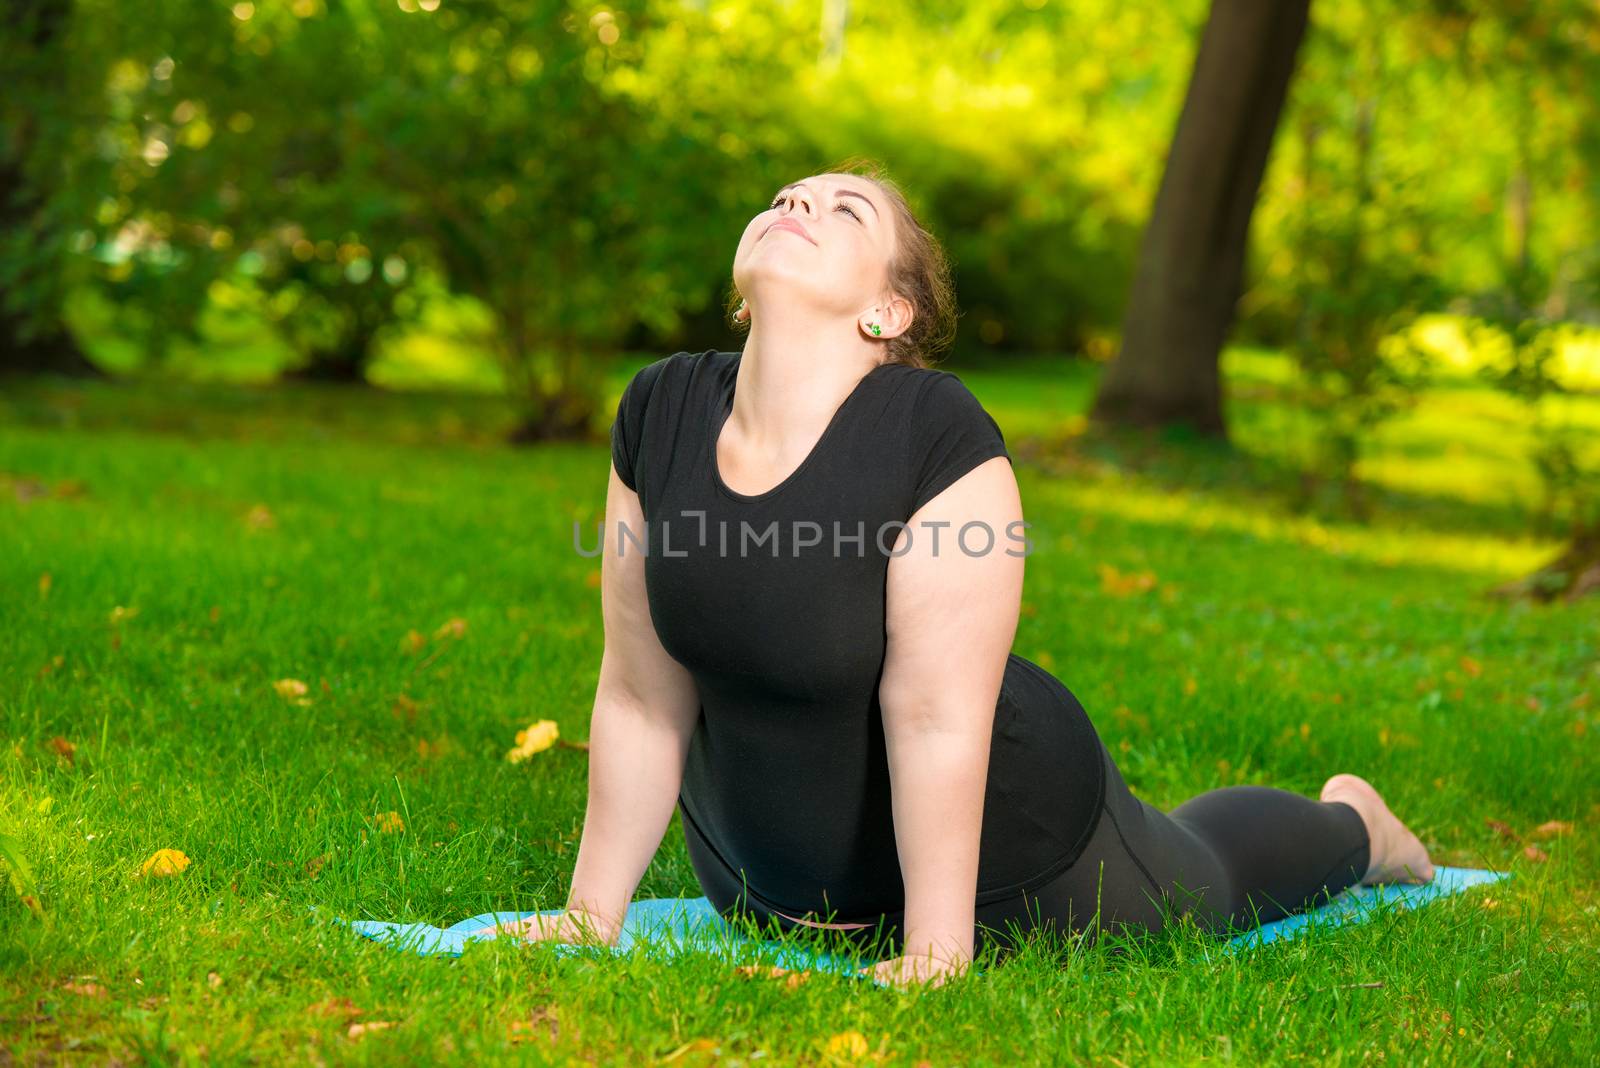 plus size sports woman in park performs stretching exercises, wo by kosmsos111